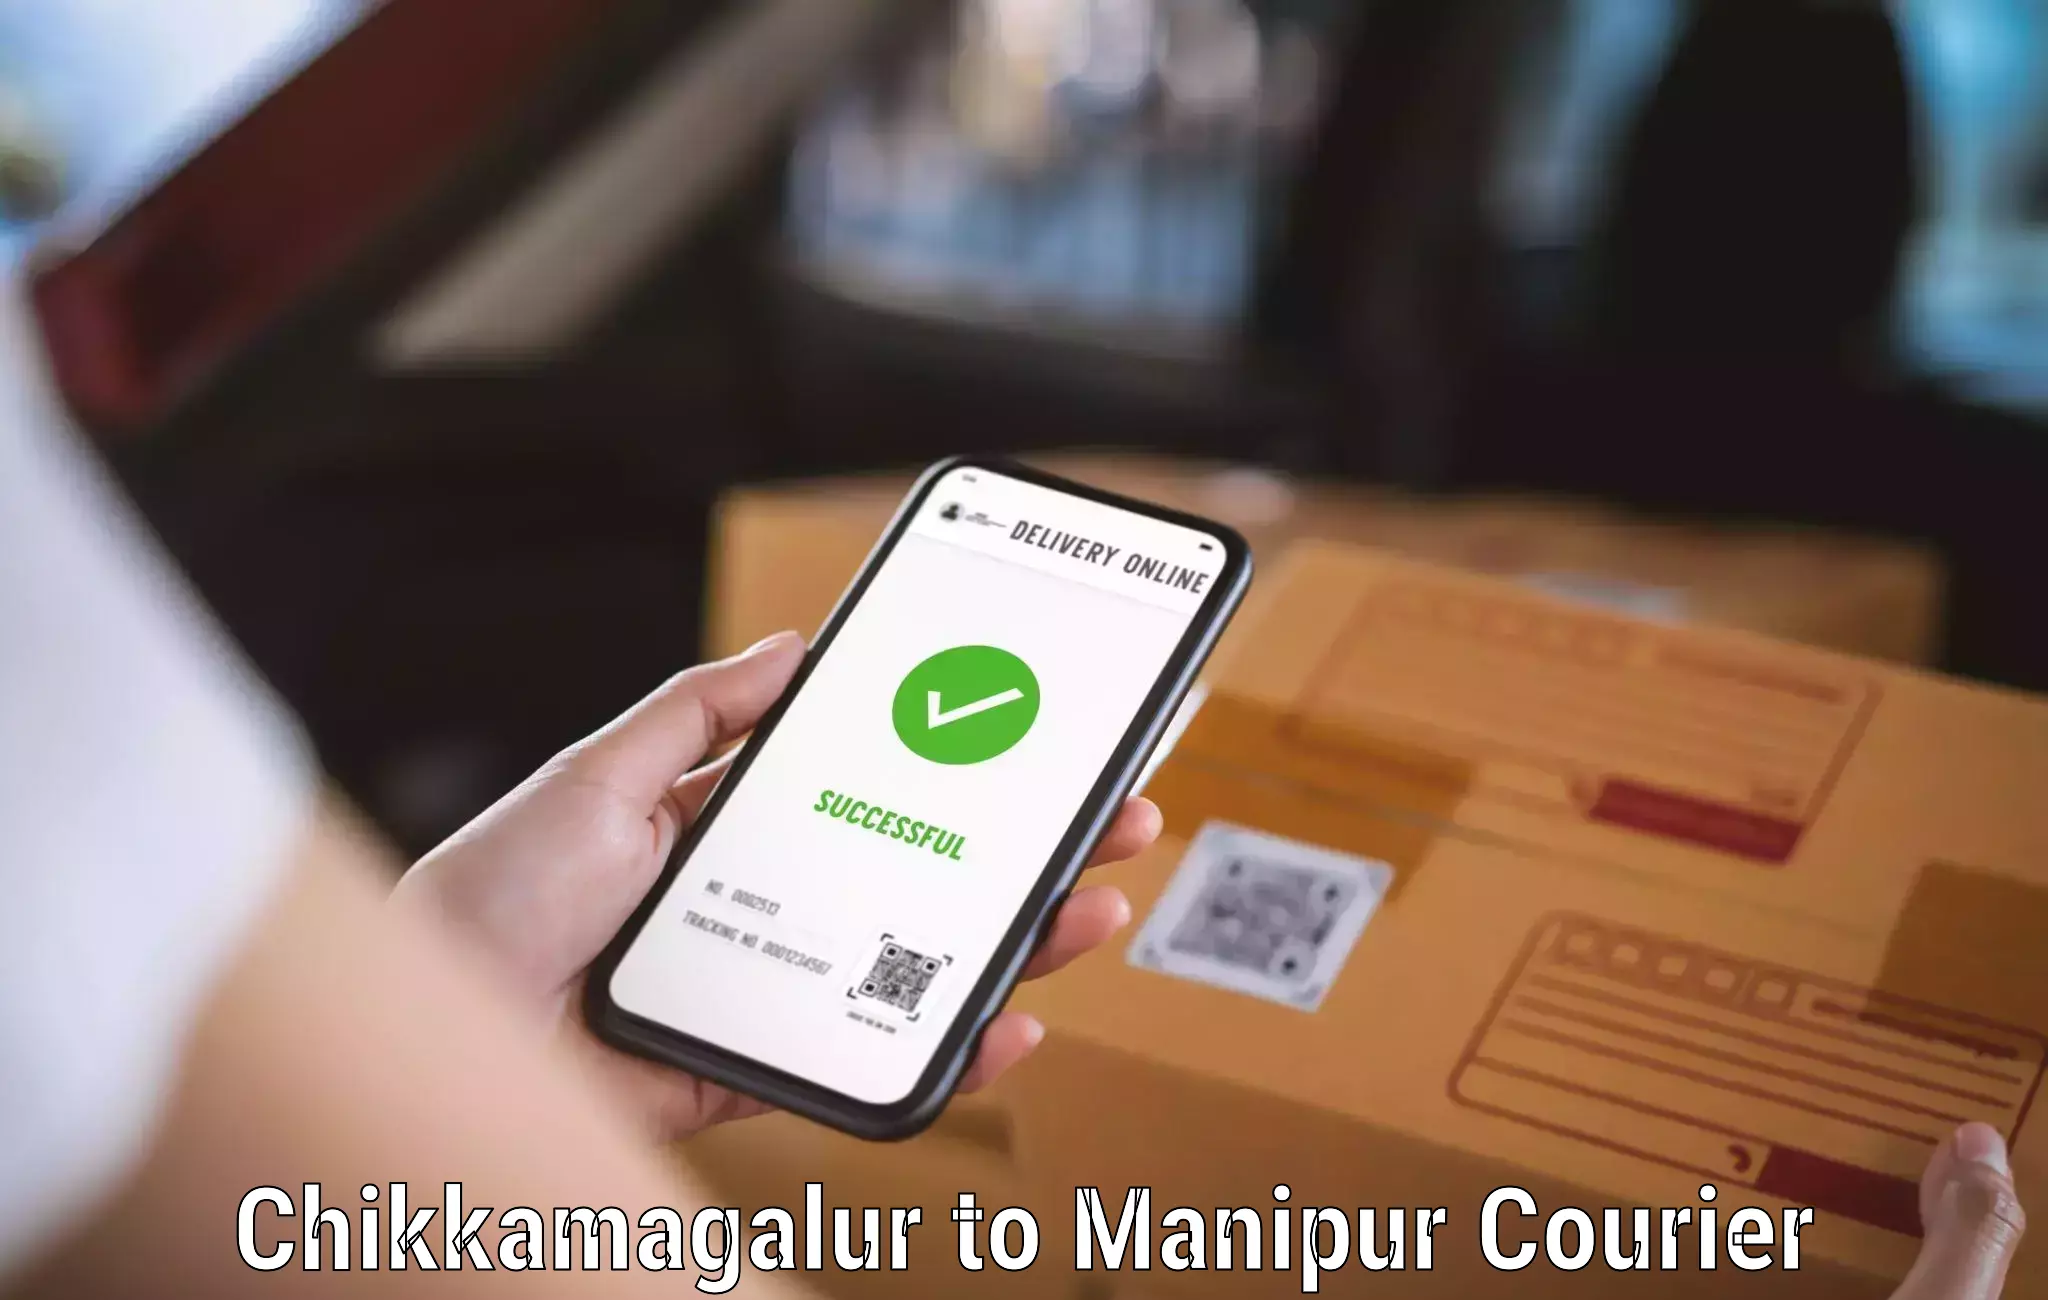 State-of-the-art courier technology Chikkamagalur to Imphal